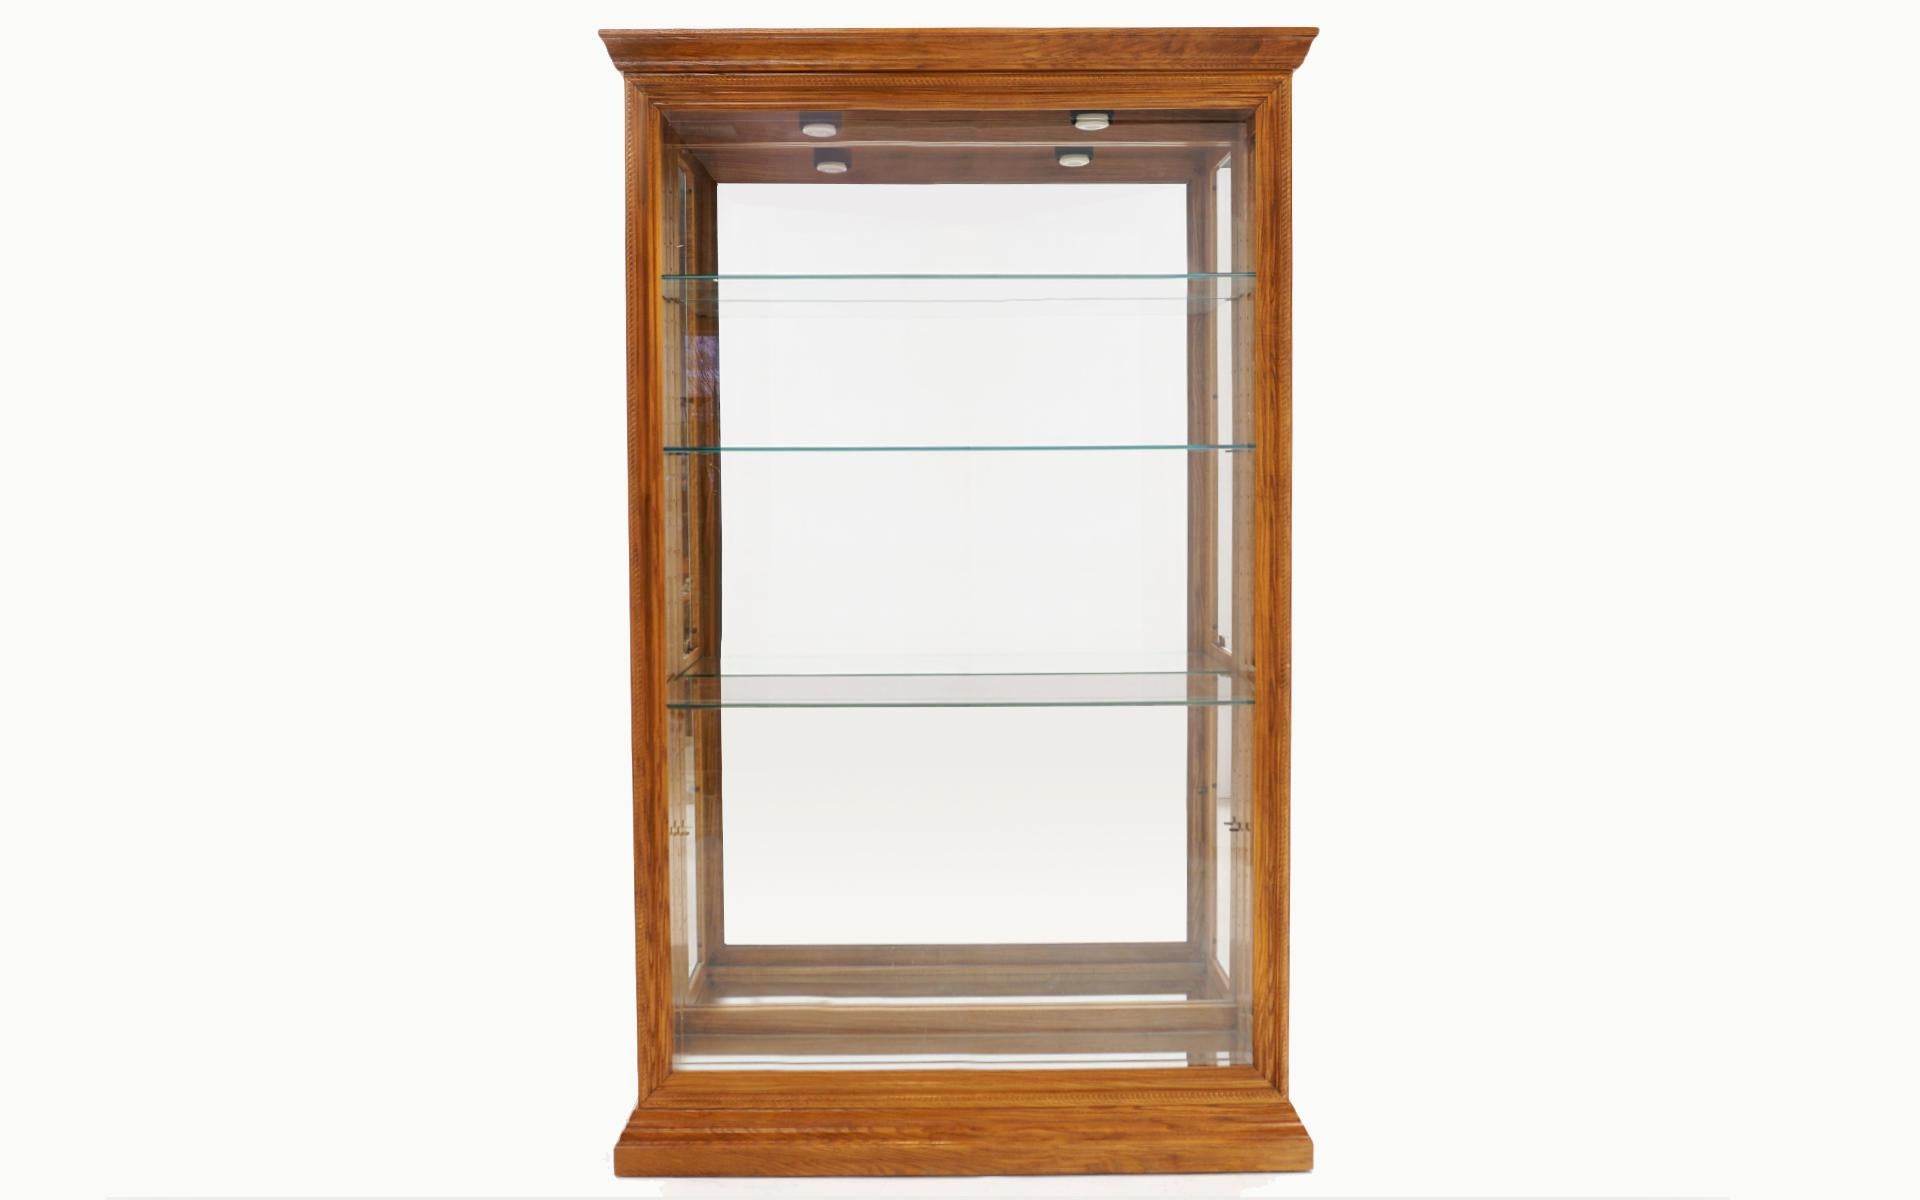 Walnut and glass lighted display / storage cabinet with five adjustable glass shelves (only three are shown in the photos). All parts are original. Access to the interior is through the side glass panels with the brass pulls. No chips or cracks to